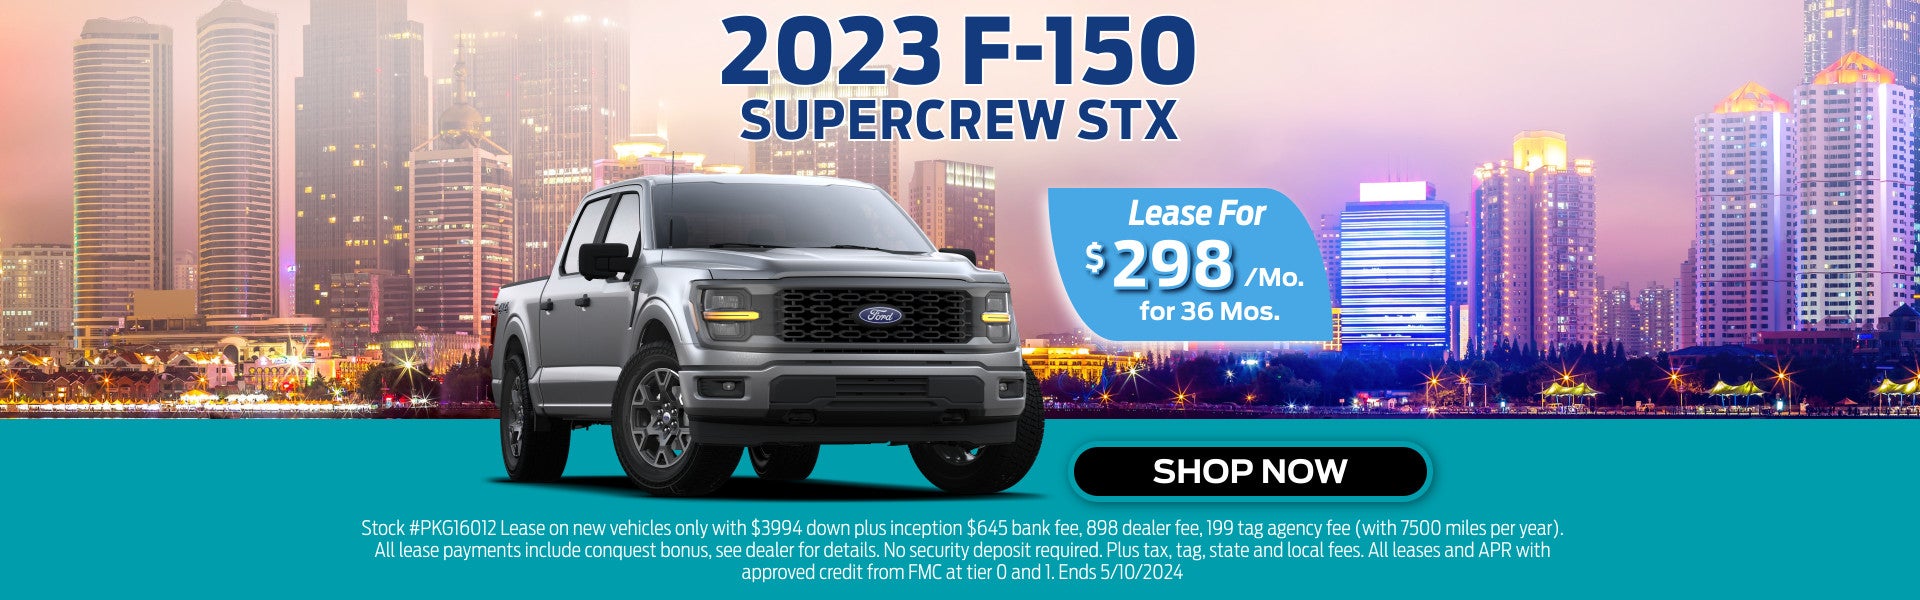 Lease 2023 F-150for $298/mo for 36 months